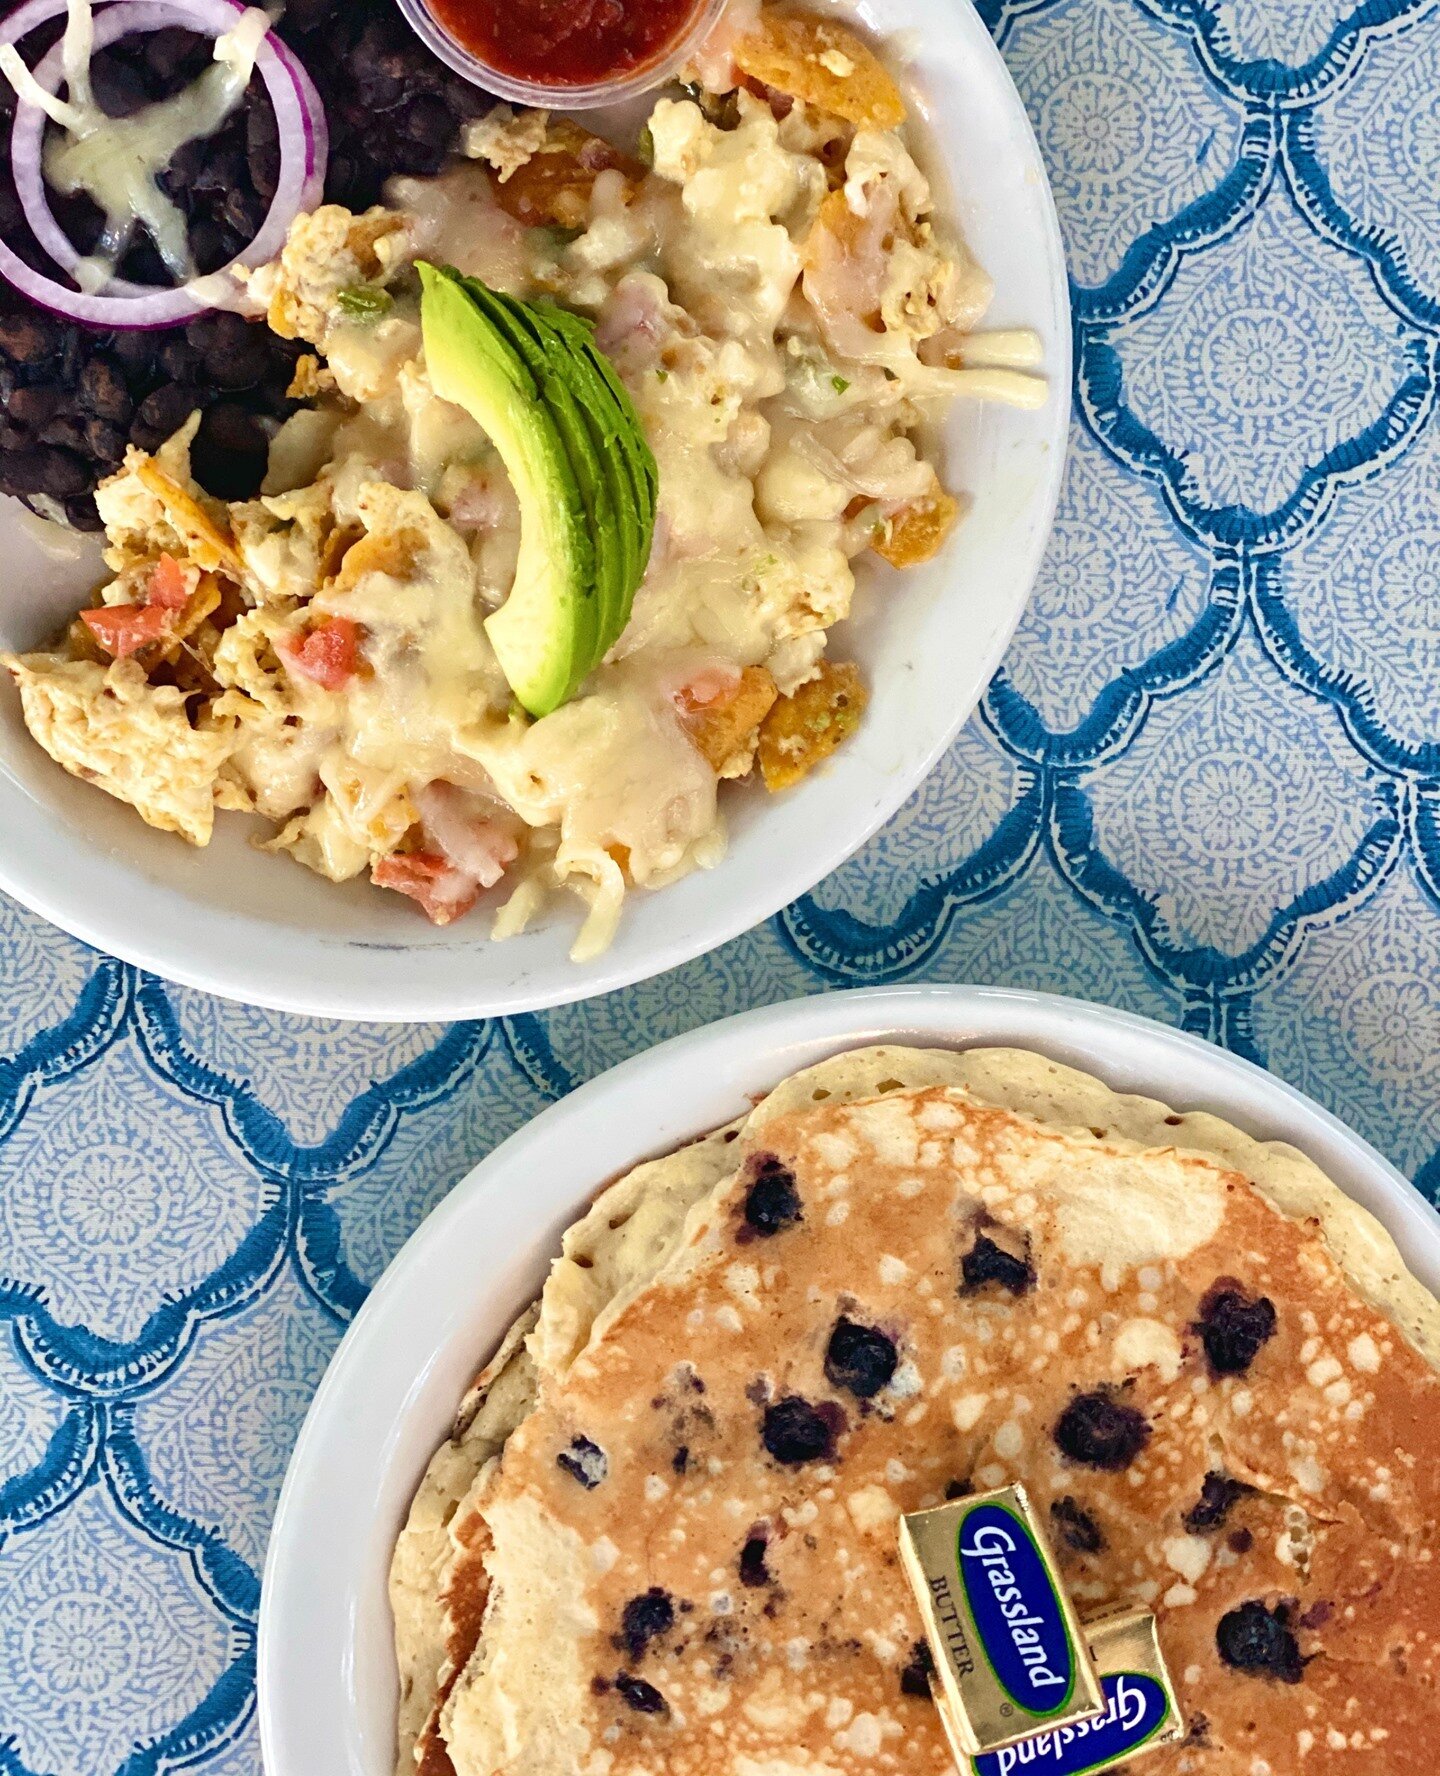 Breakfast is served 🥞(Pro-tip! Add 🥑 to those migas!) Visit us for full-service dine-in or order your Magnolia favorites online for pick up or delivery, link in our bio!⁠
⁠
Masks required for pick up &amp; dine-in for all customers over the age of 